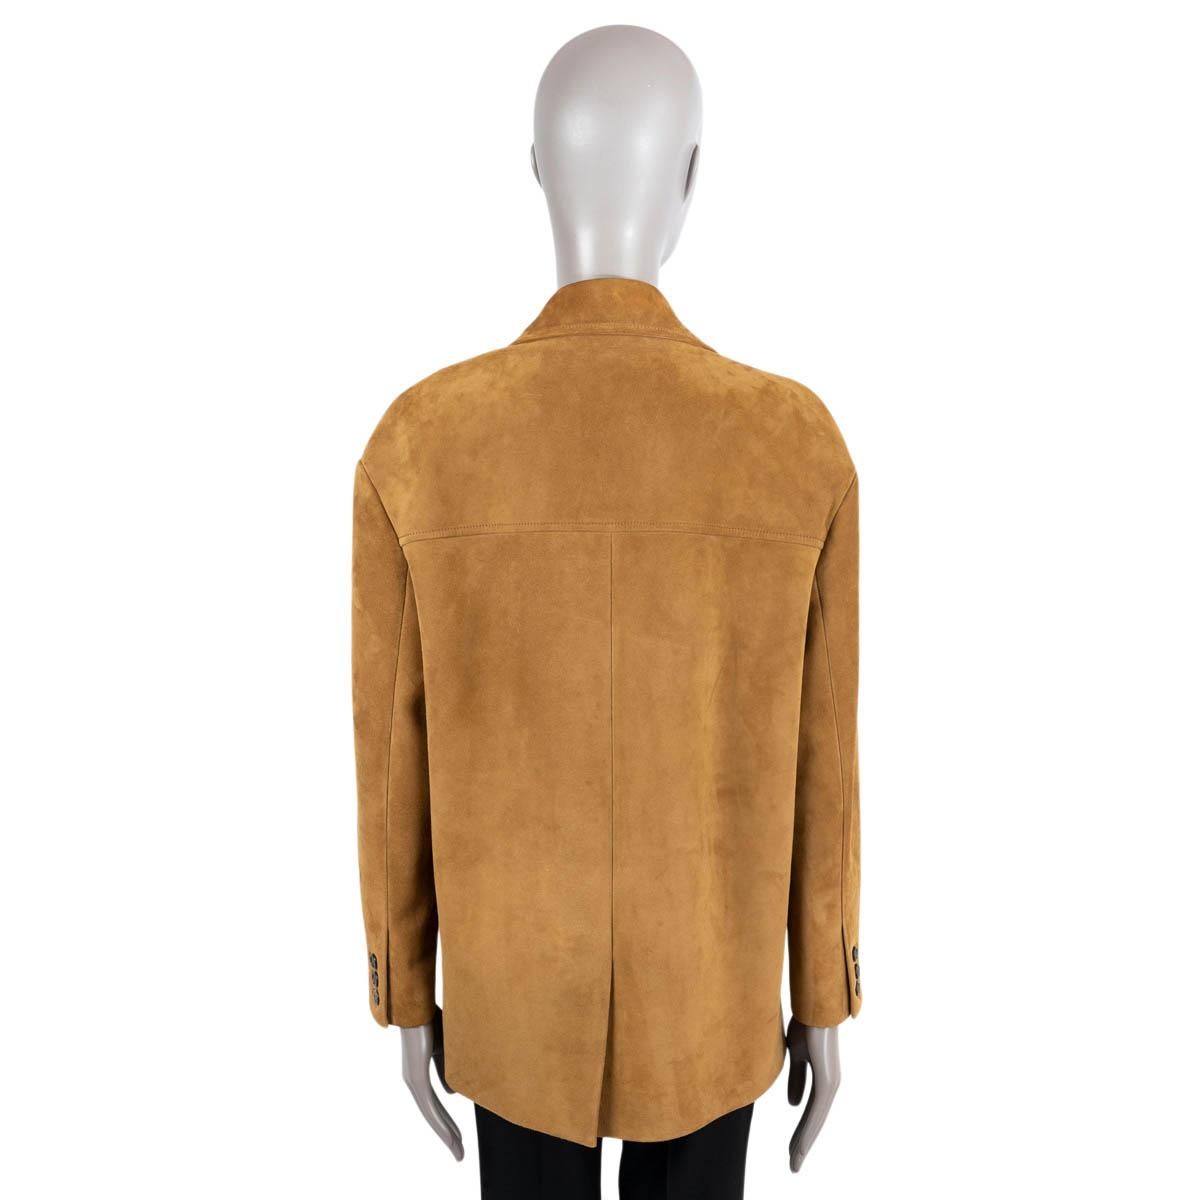 PRADA camel brown suede 2022 SINGLE-BREASTED OVERSIZED Jacket 38 XS 1